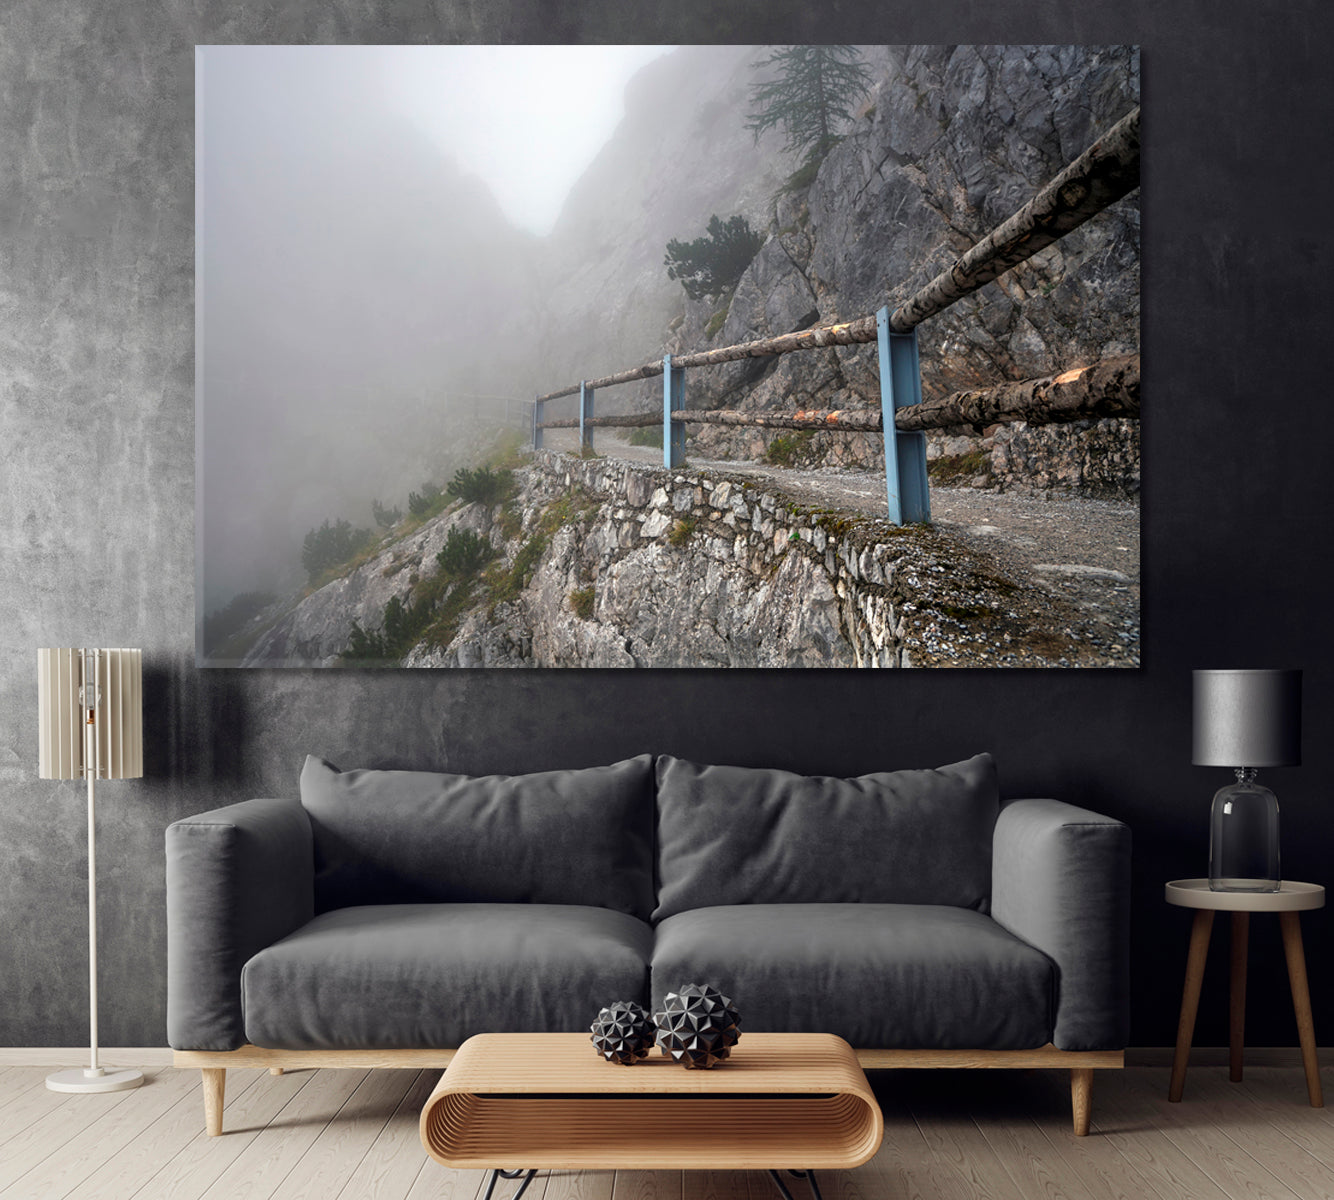 Trail to Werfen Ice Caves Canvas Print ArtLexy 1 Panel 24"x16" inches 